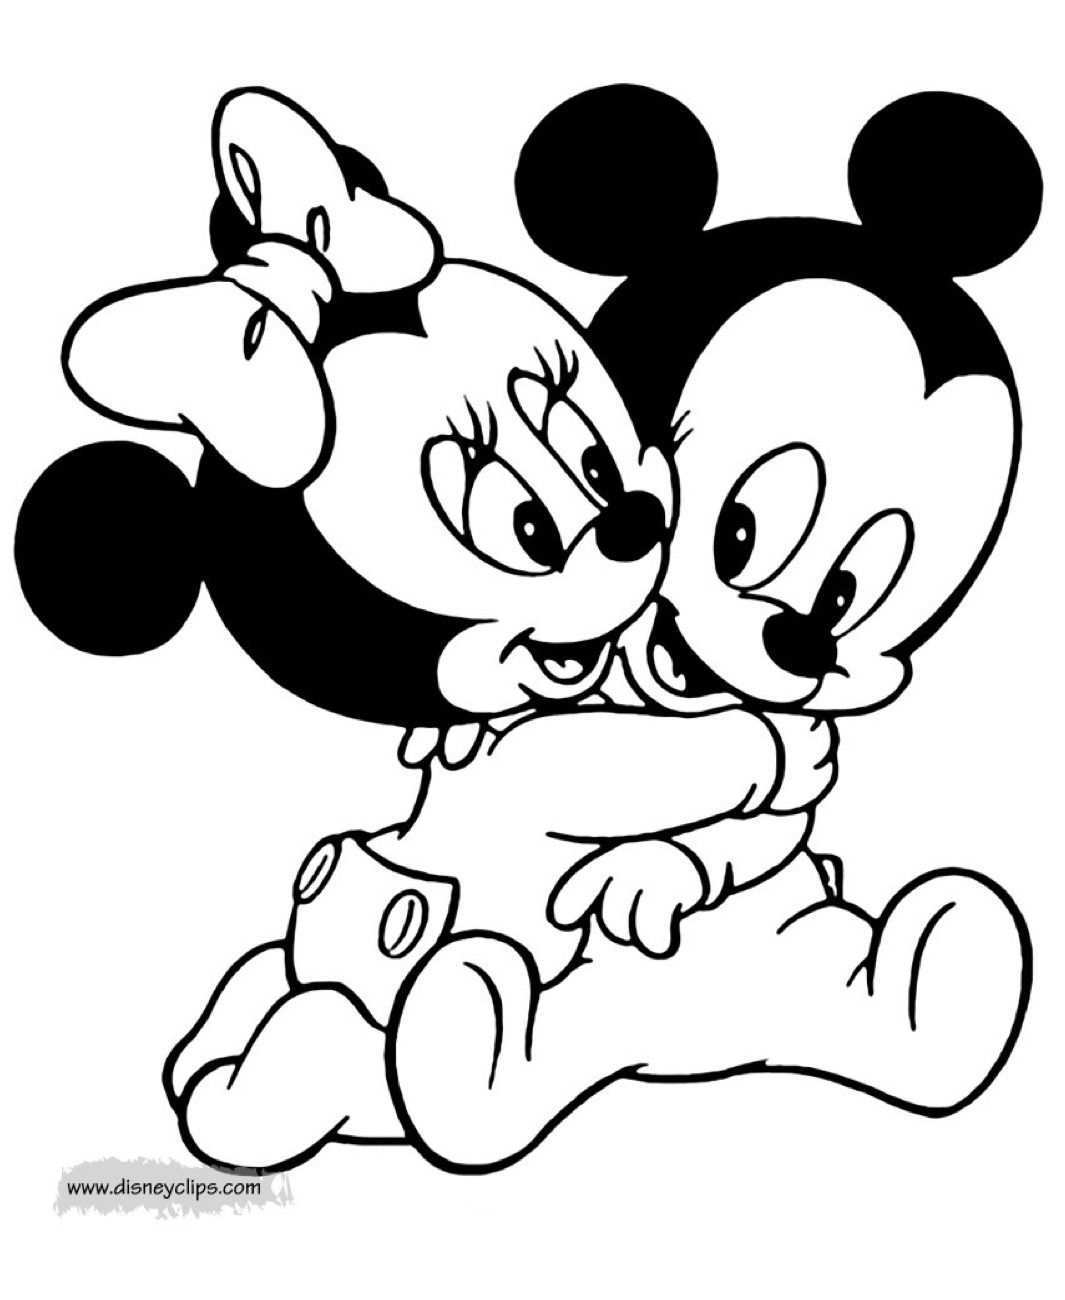 Colouring Page Mickey Coloring Pages Mickey Mouse Coloring Pages Minnie Mouse Colorin